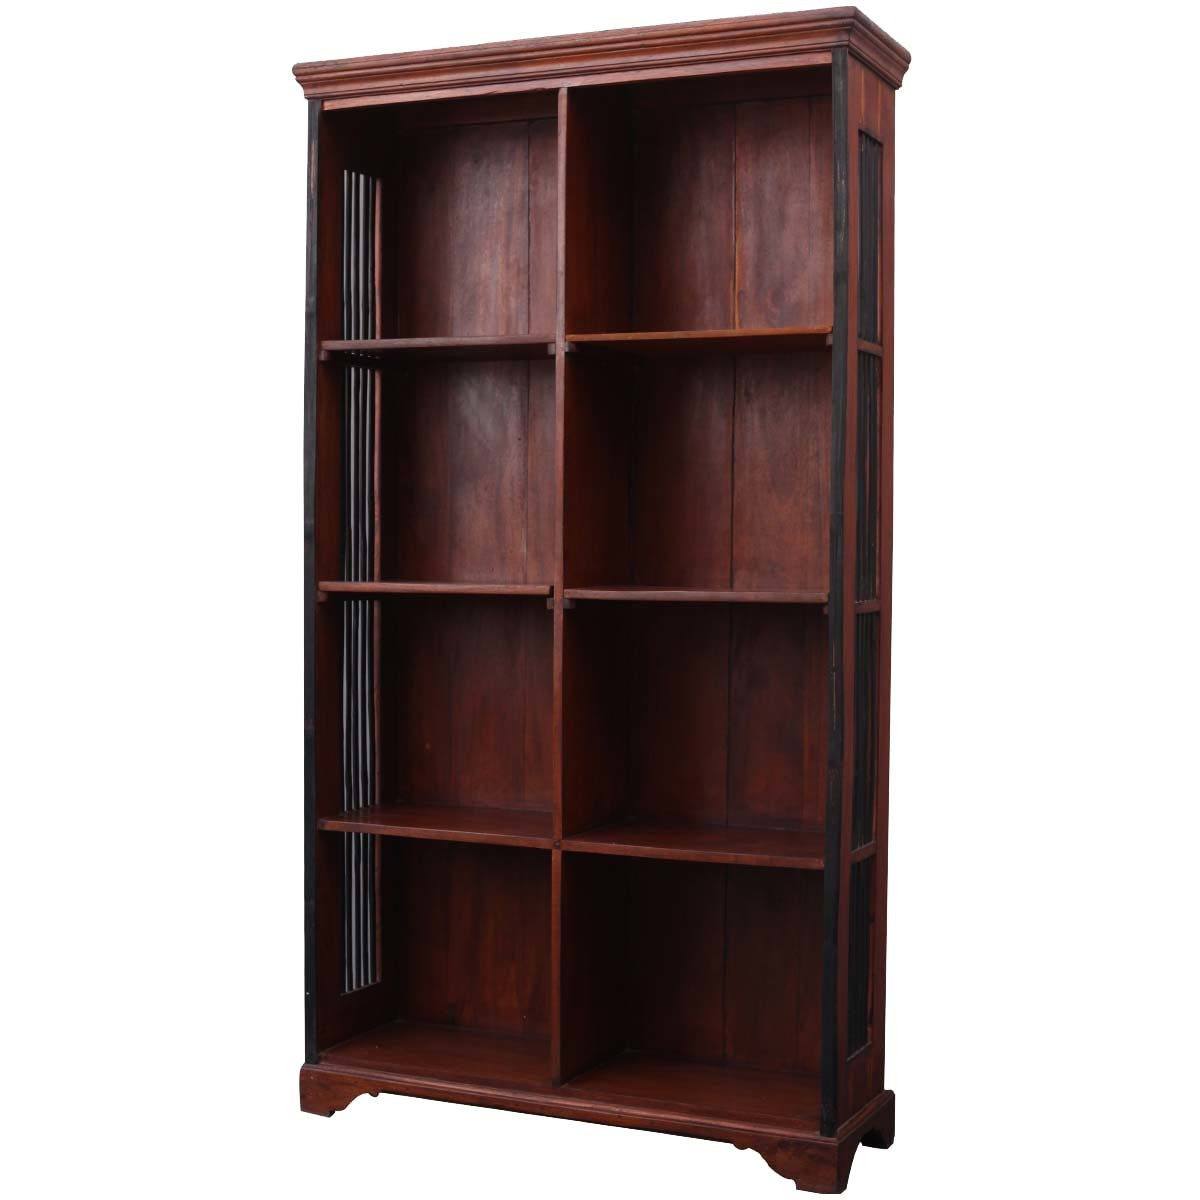 Most Favored Open Wood Shelves Bookshelves That Will Leave intended for proportions 1200 X 1200